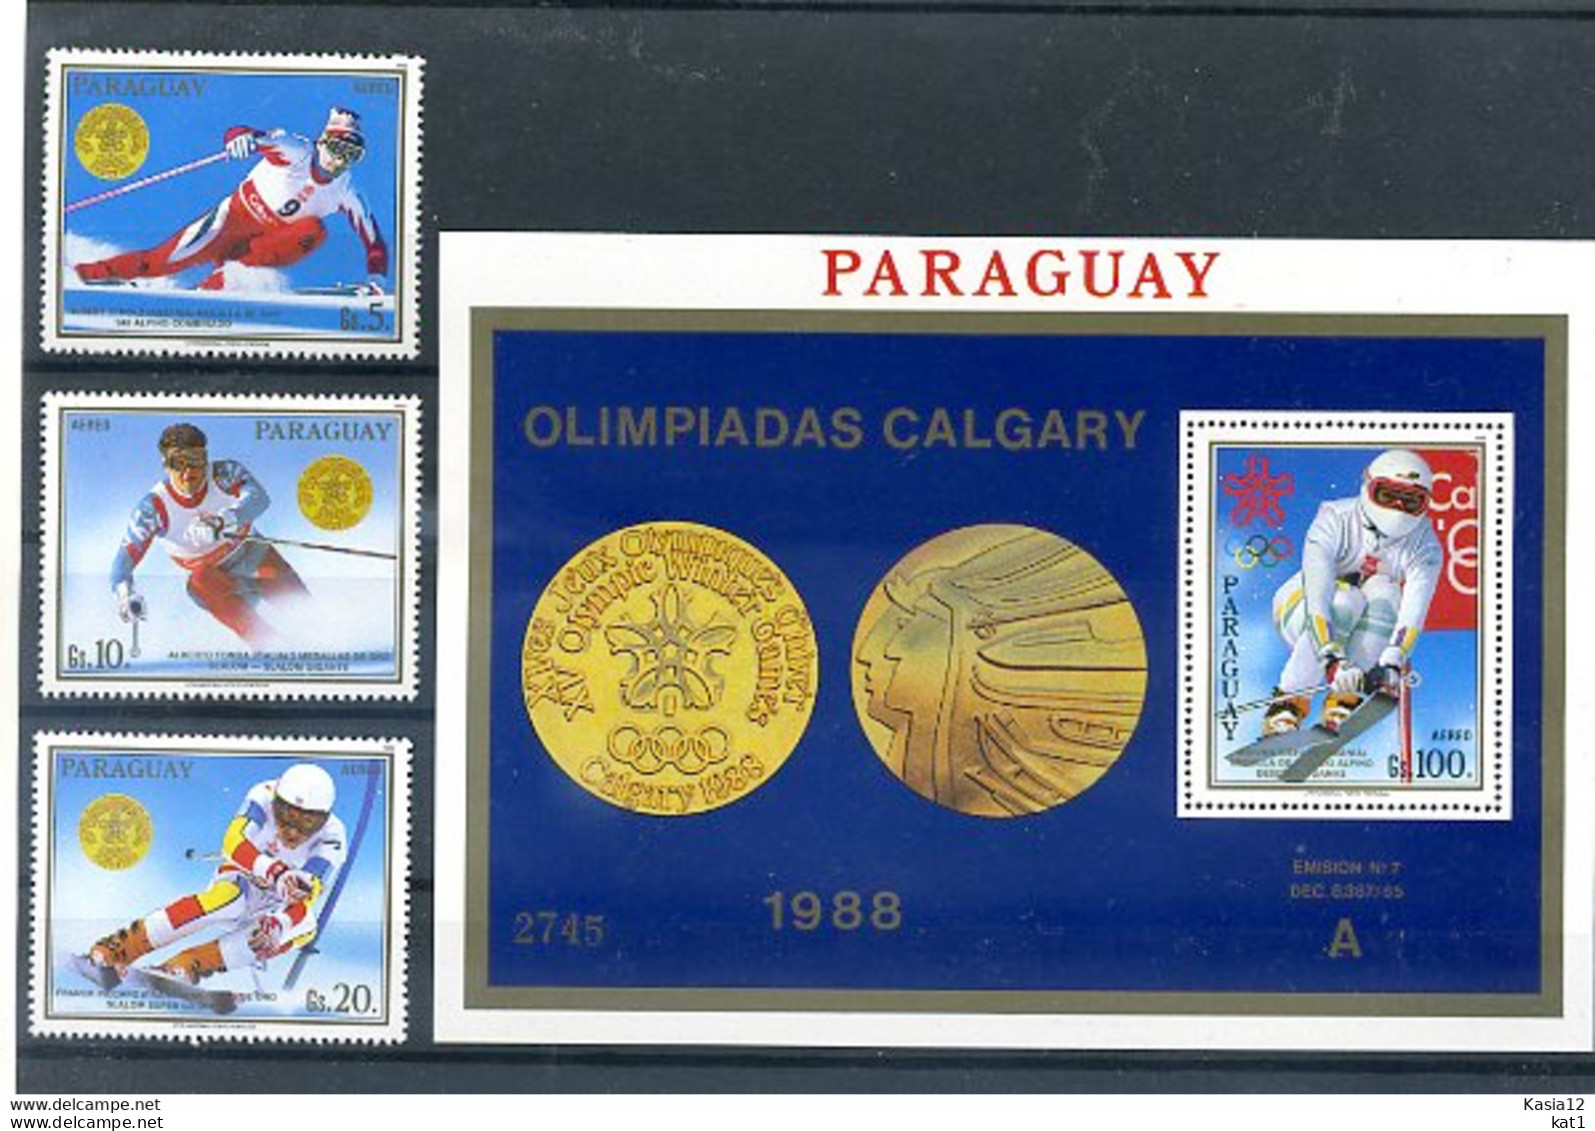 A17729)Olympia 88: Paraguay 4262 - 4264** + Bl 453** - Hiver 1988: Calgary